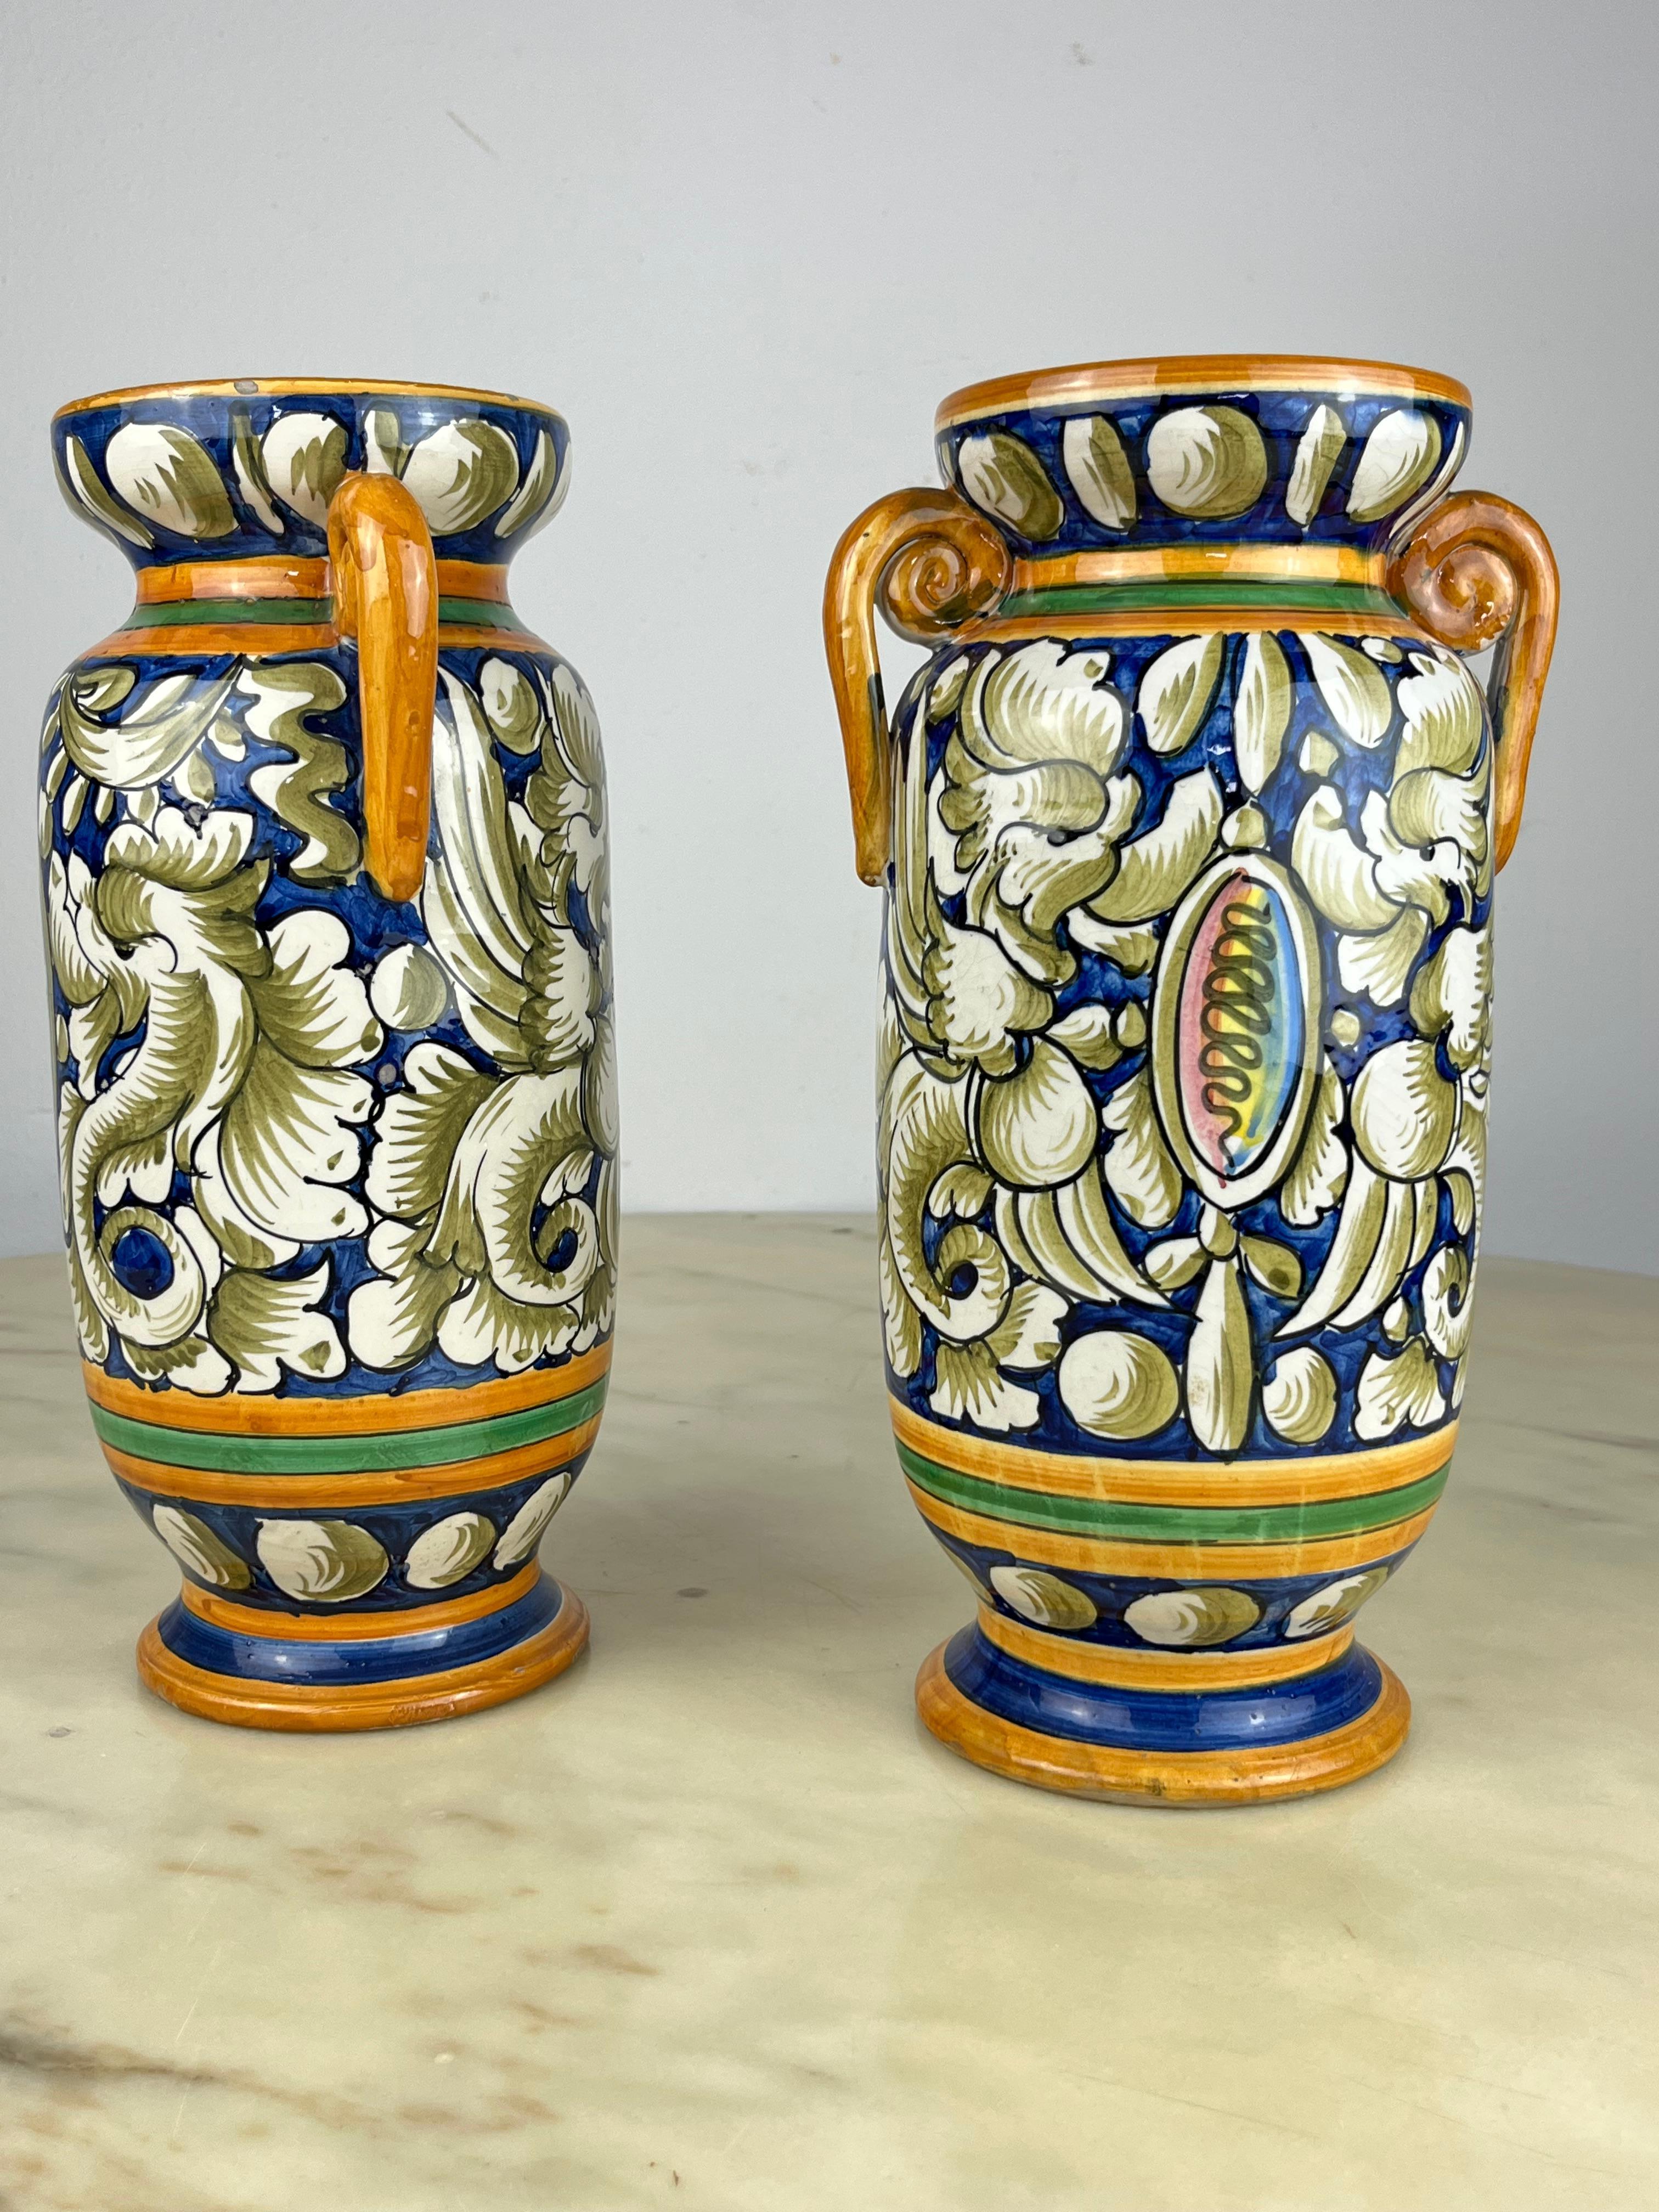 Pair of hand-painted and hand-crafted ceramic amphorae Caltagirone, Italy, 1980s
Purchased by my grandparents, they are 30 cm high. Intact and in excellent condition.